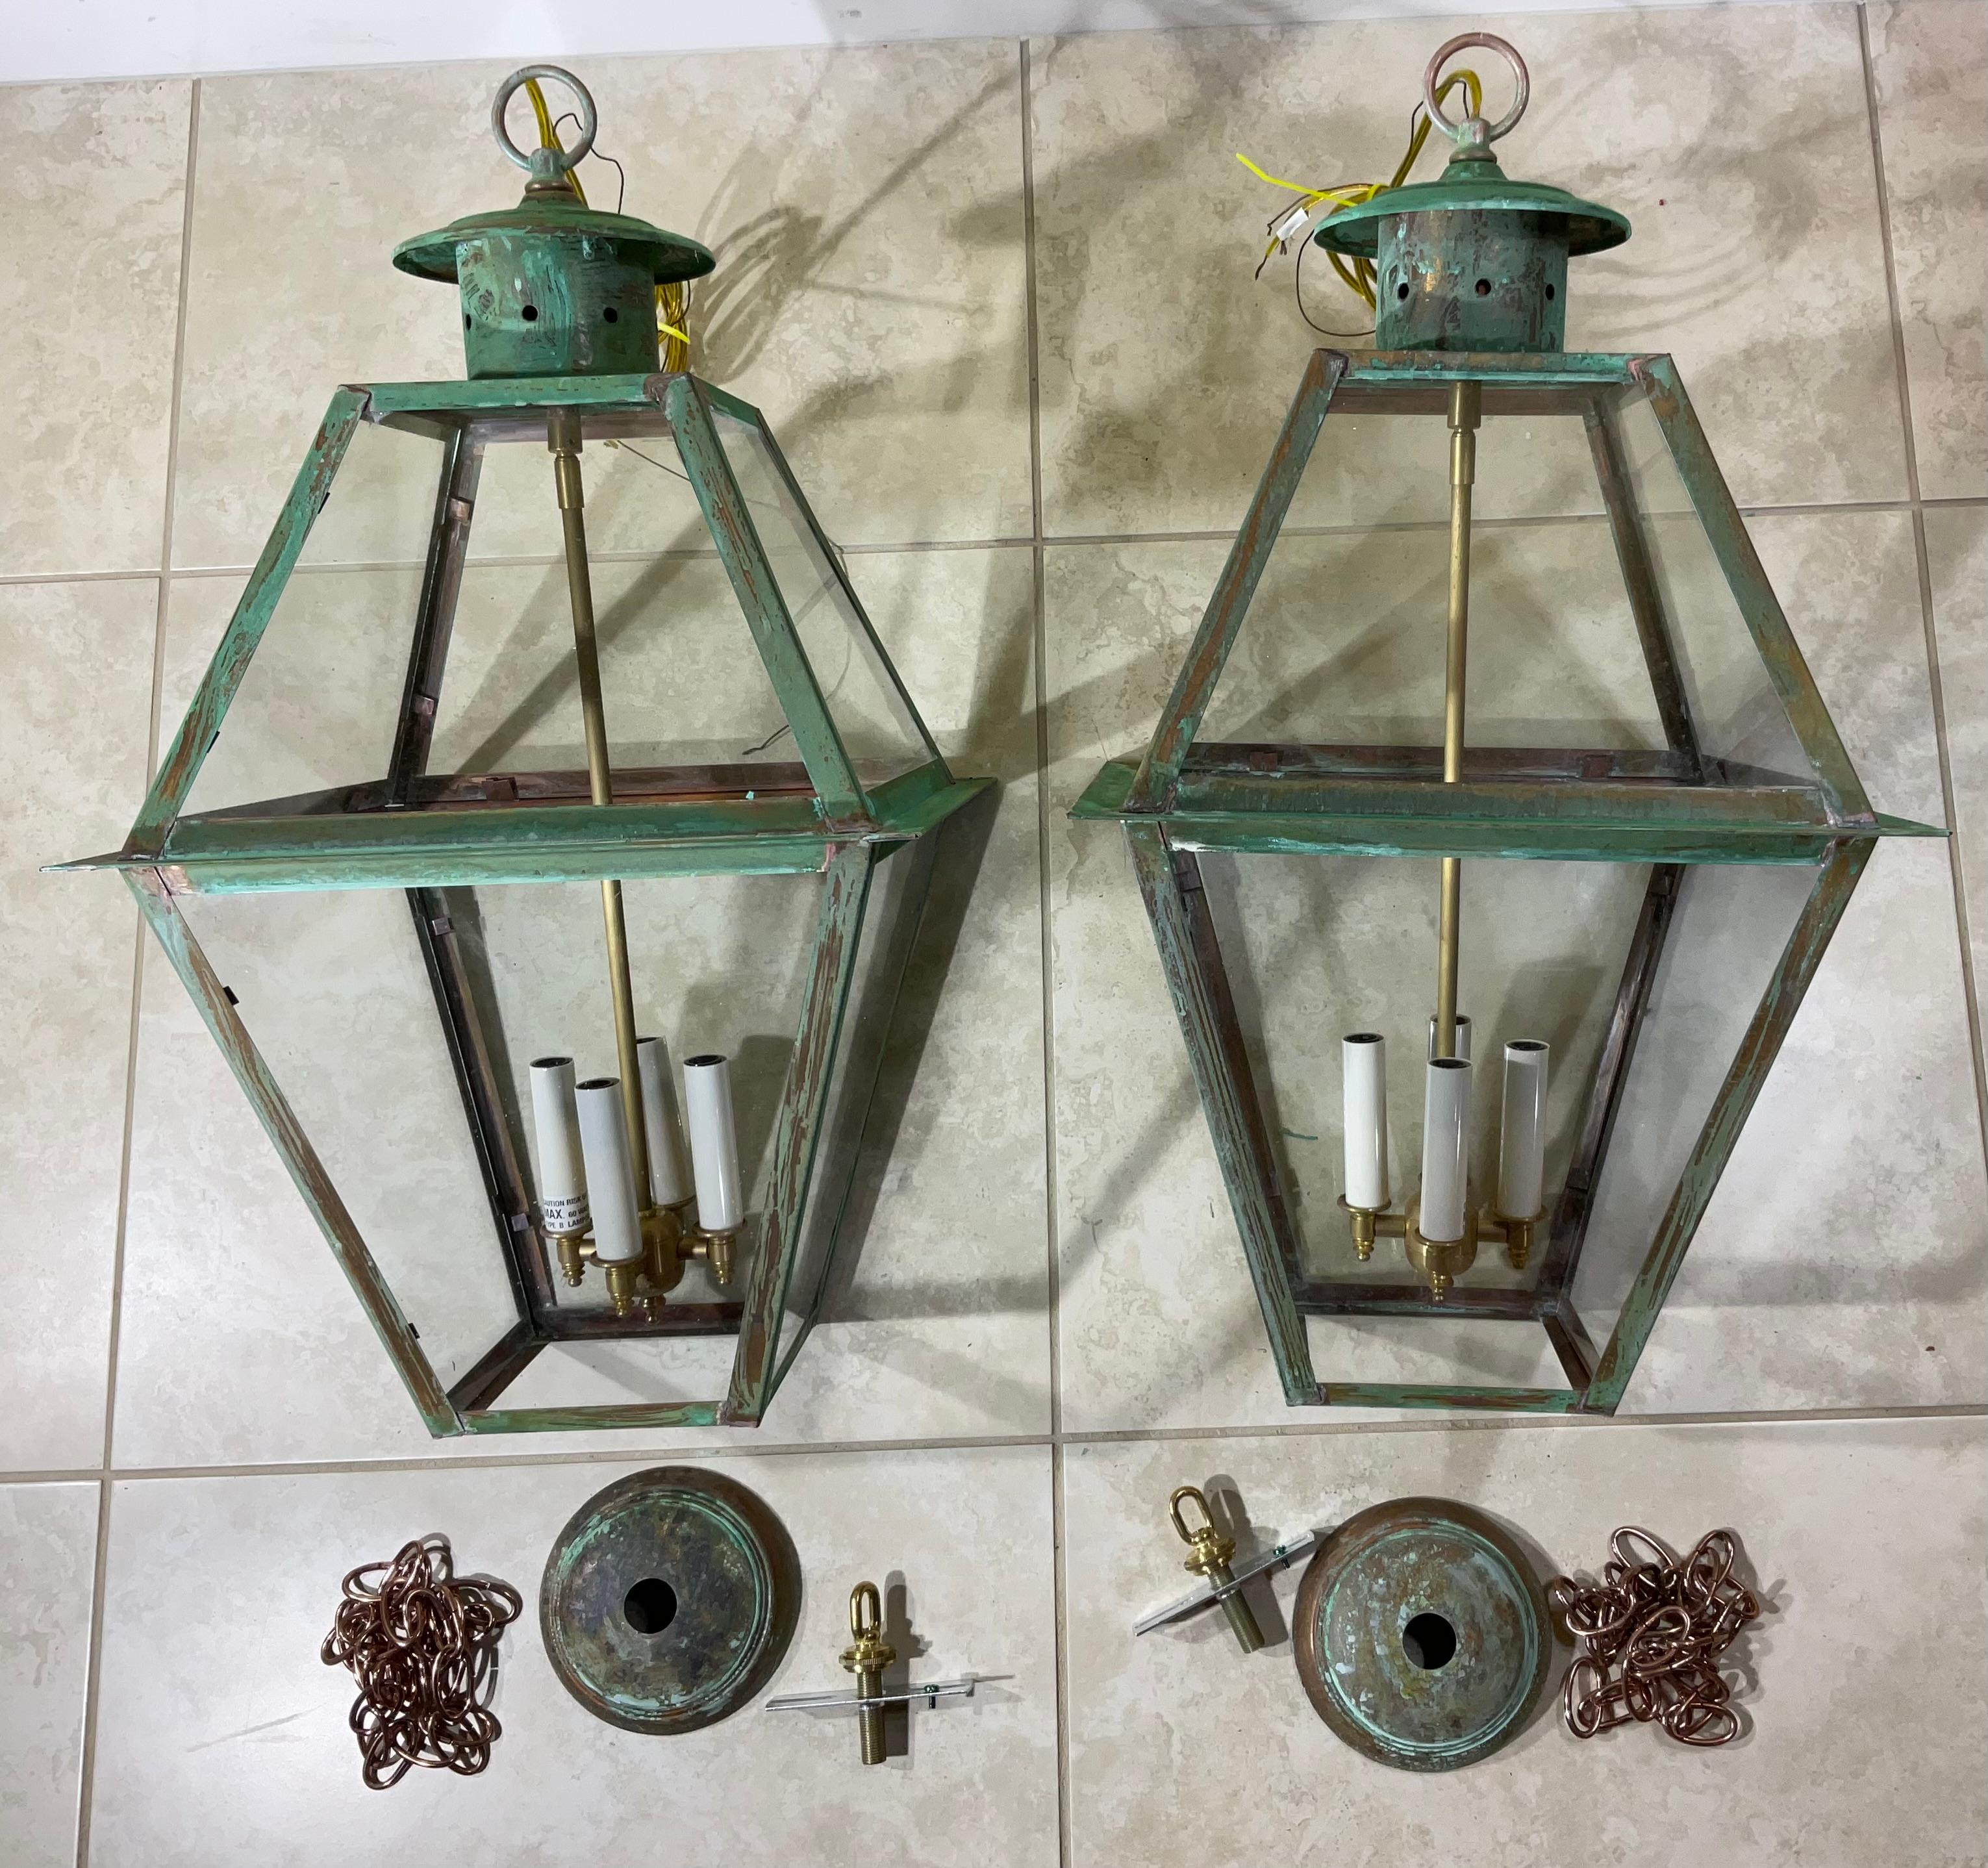 Exceptional four sides hanging pair of lanterns made of handcrafted solid copper and brass stem with four 60/watt lights, beautiful patina ,suitable for wet location Made in the US ,up to US code UL approved  ,great look indoor or outdoor.  canopy